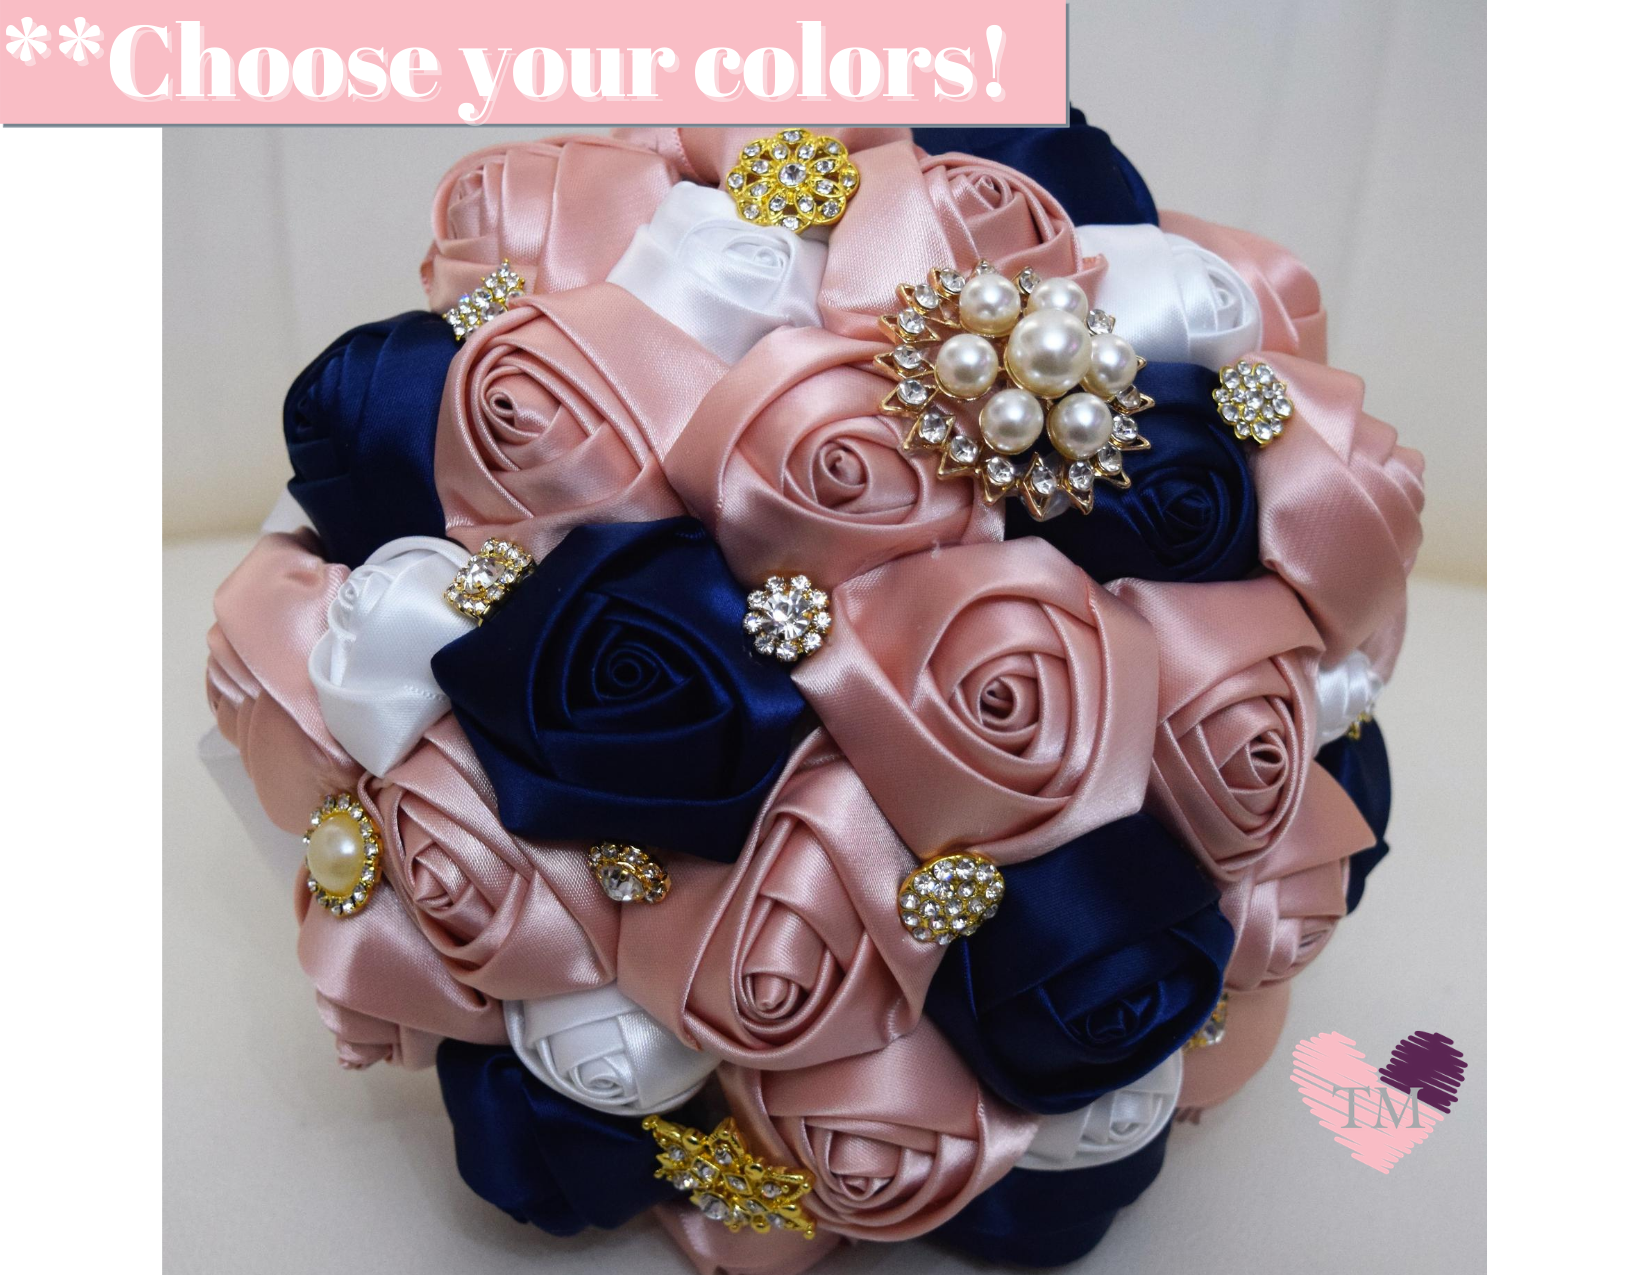 Place your order, eveeything is customizable from the color rosses to